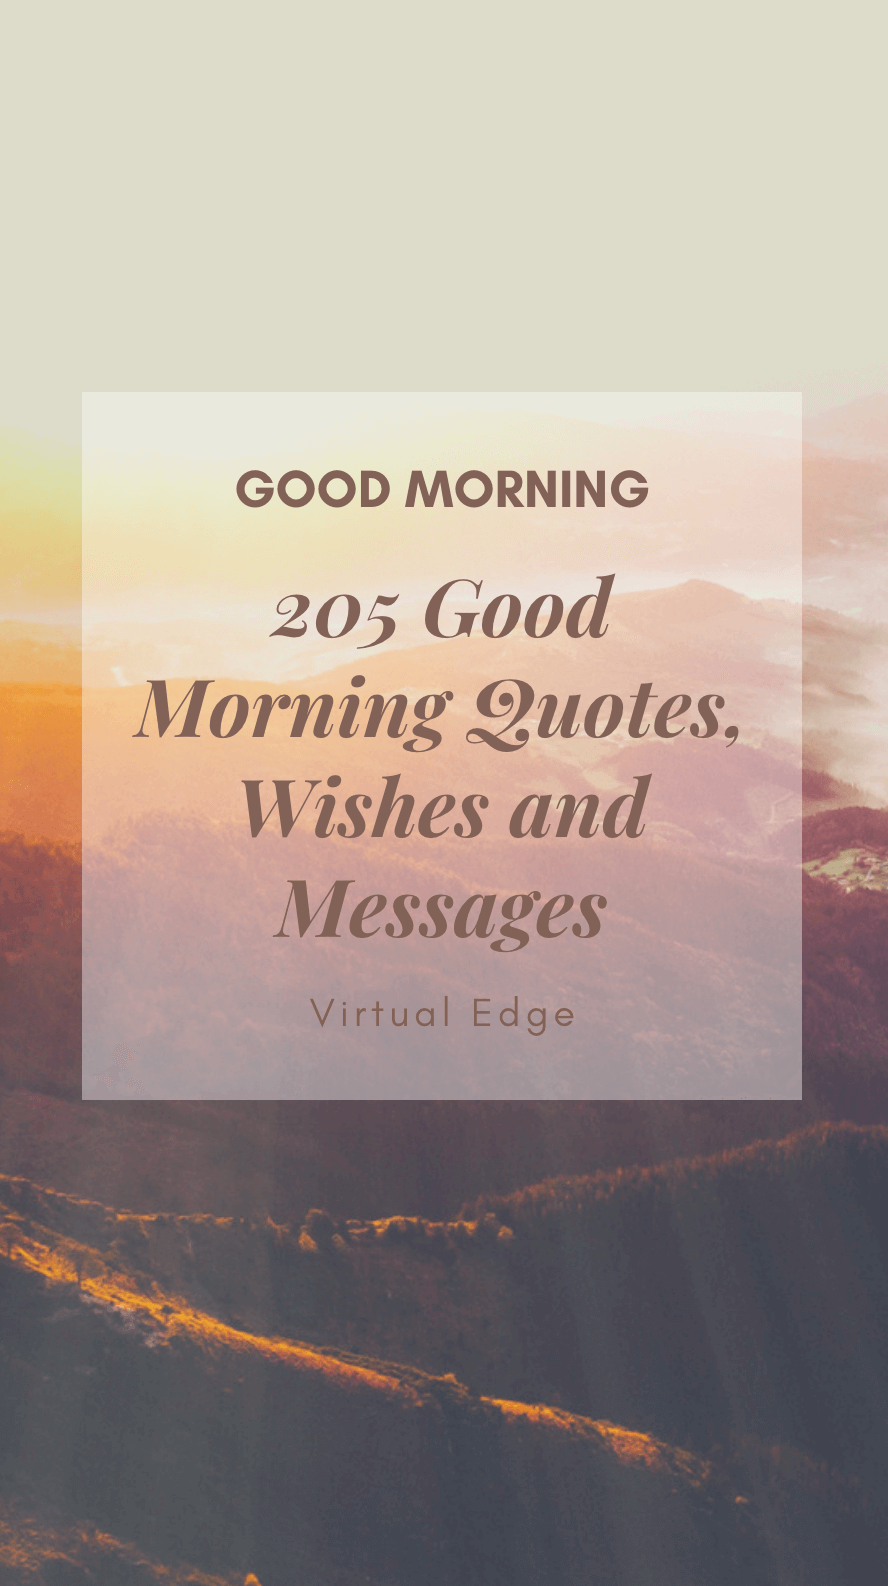 205 Good Morning Quotes, Wishes and Messages